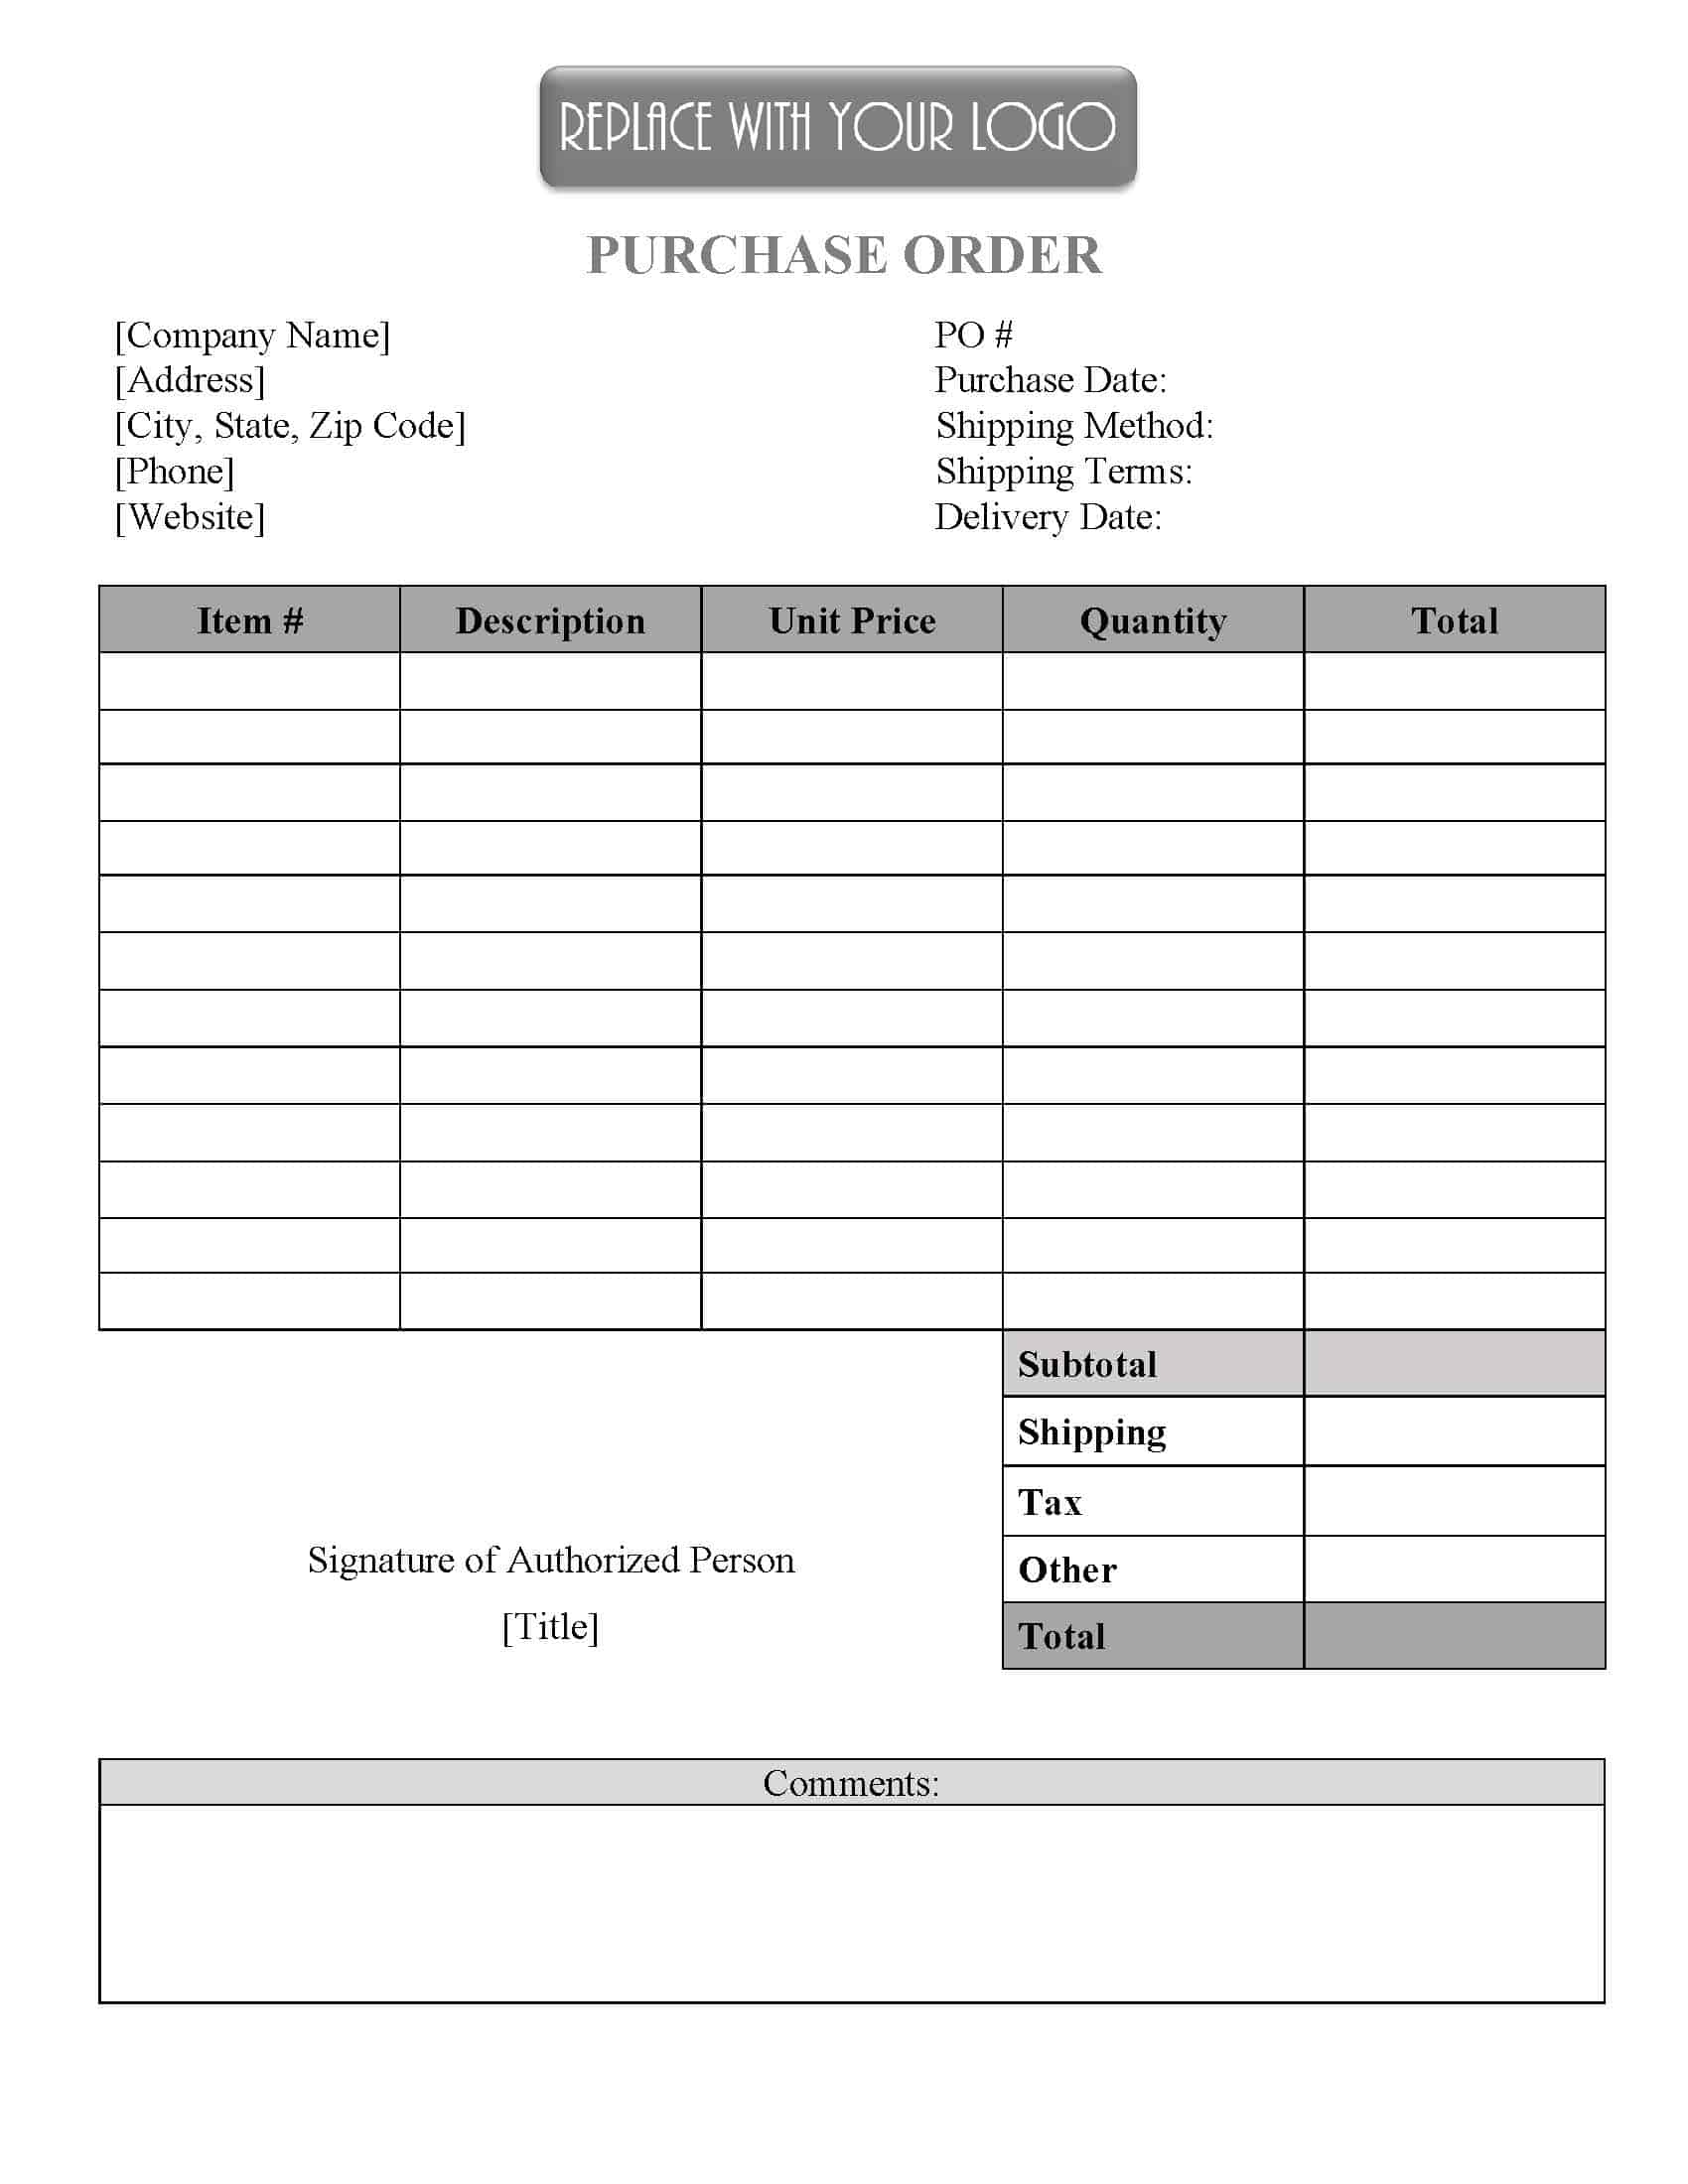 FREE Purchase Order Template | Instant Download